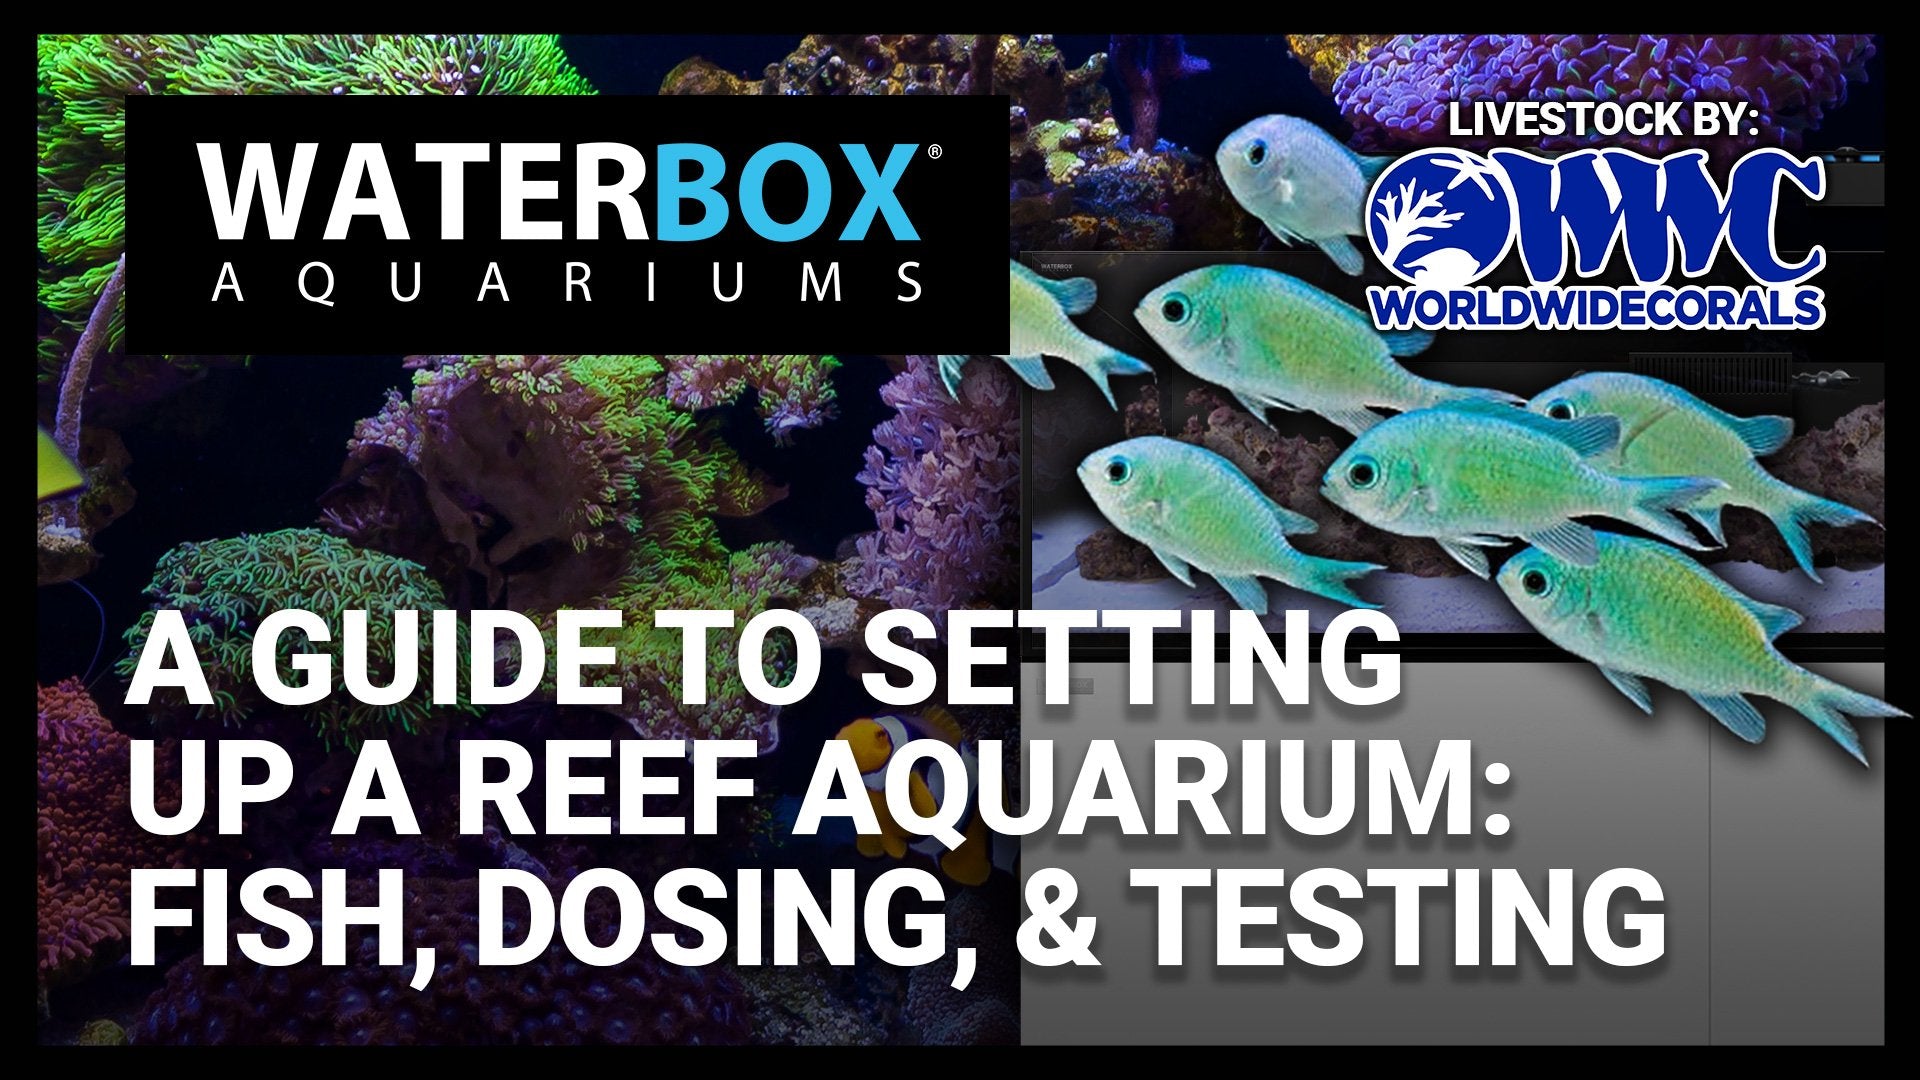 Visiting World Wide Corals for the video series: A Guide to Setting Up a Reef Aquarium